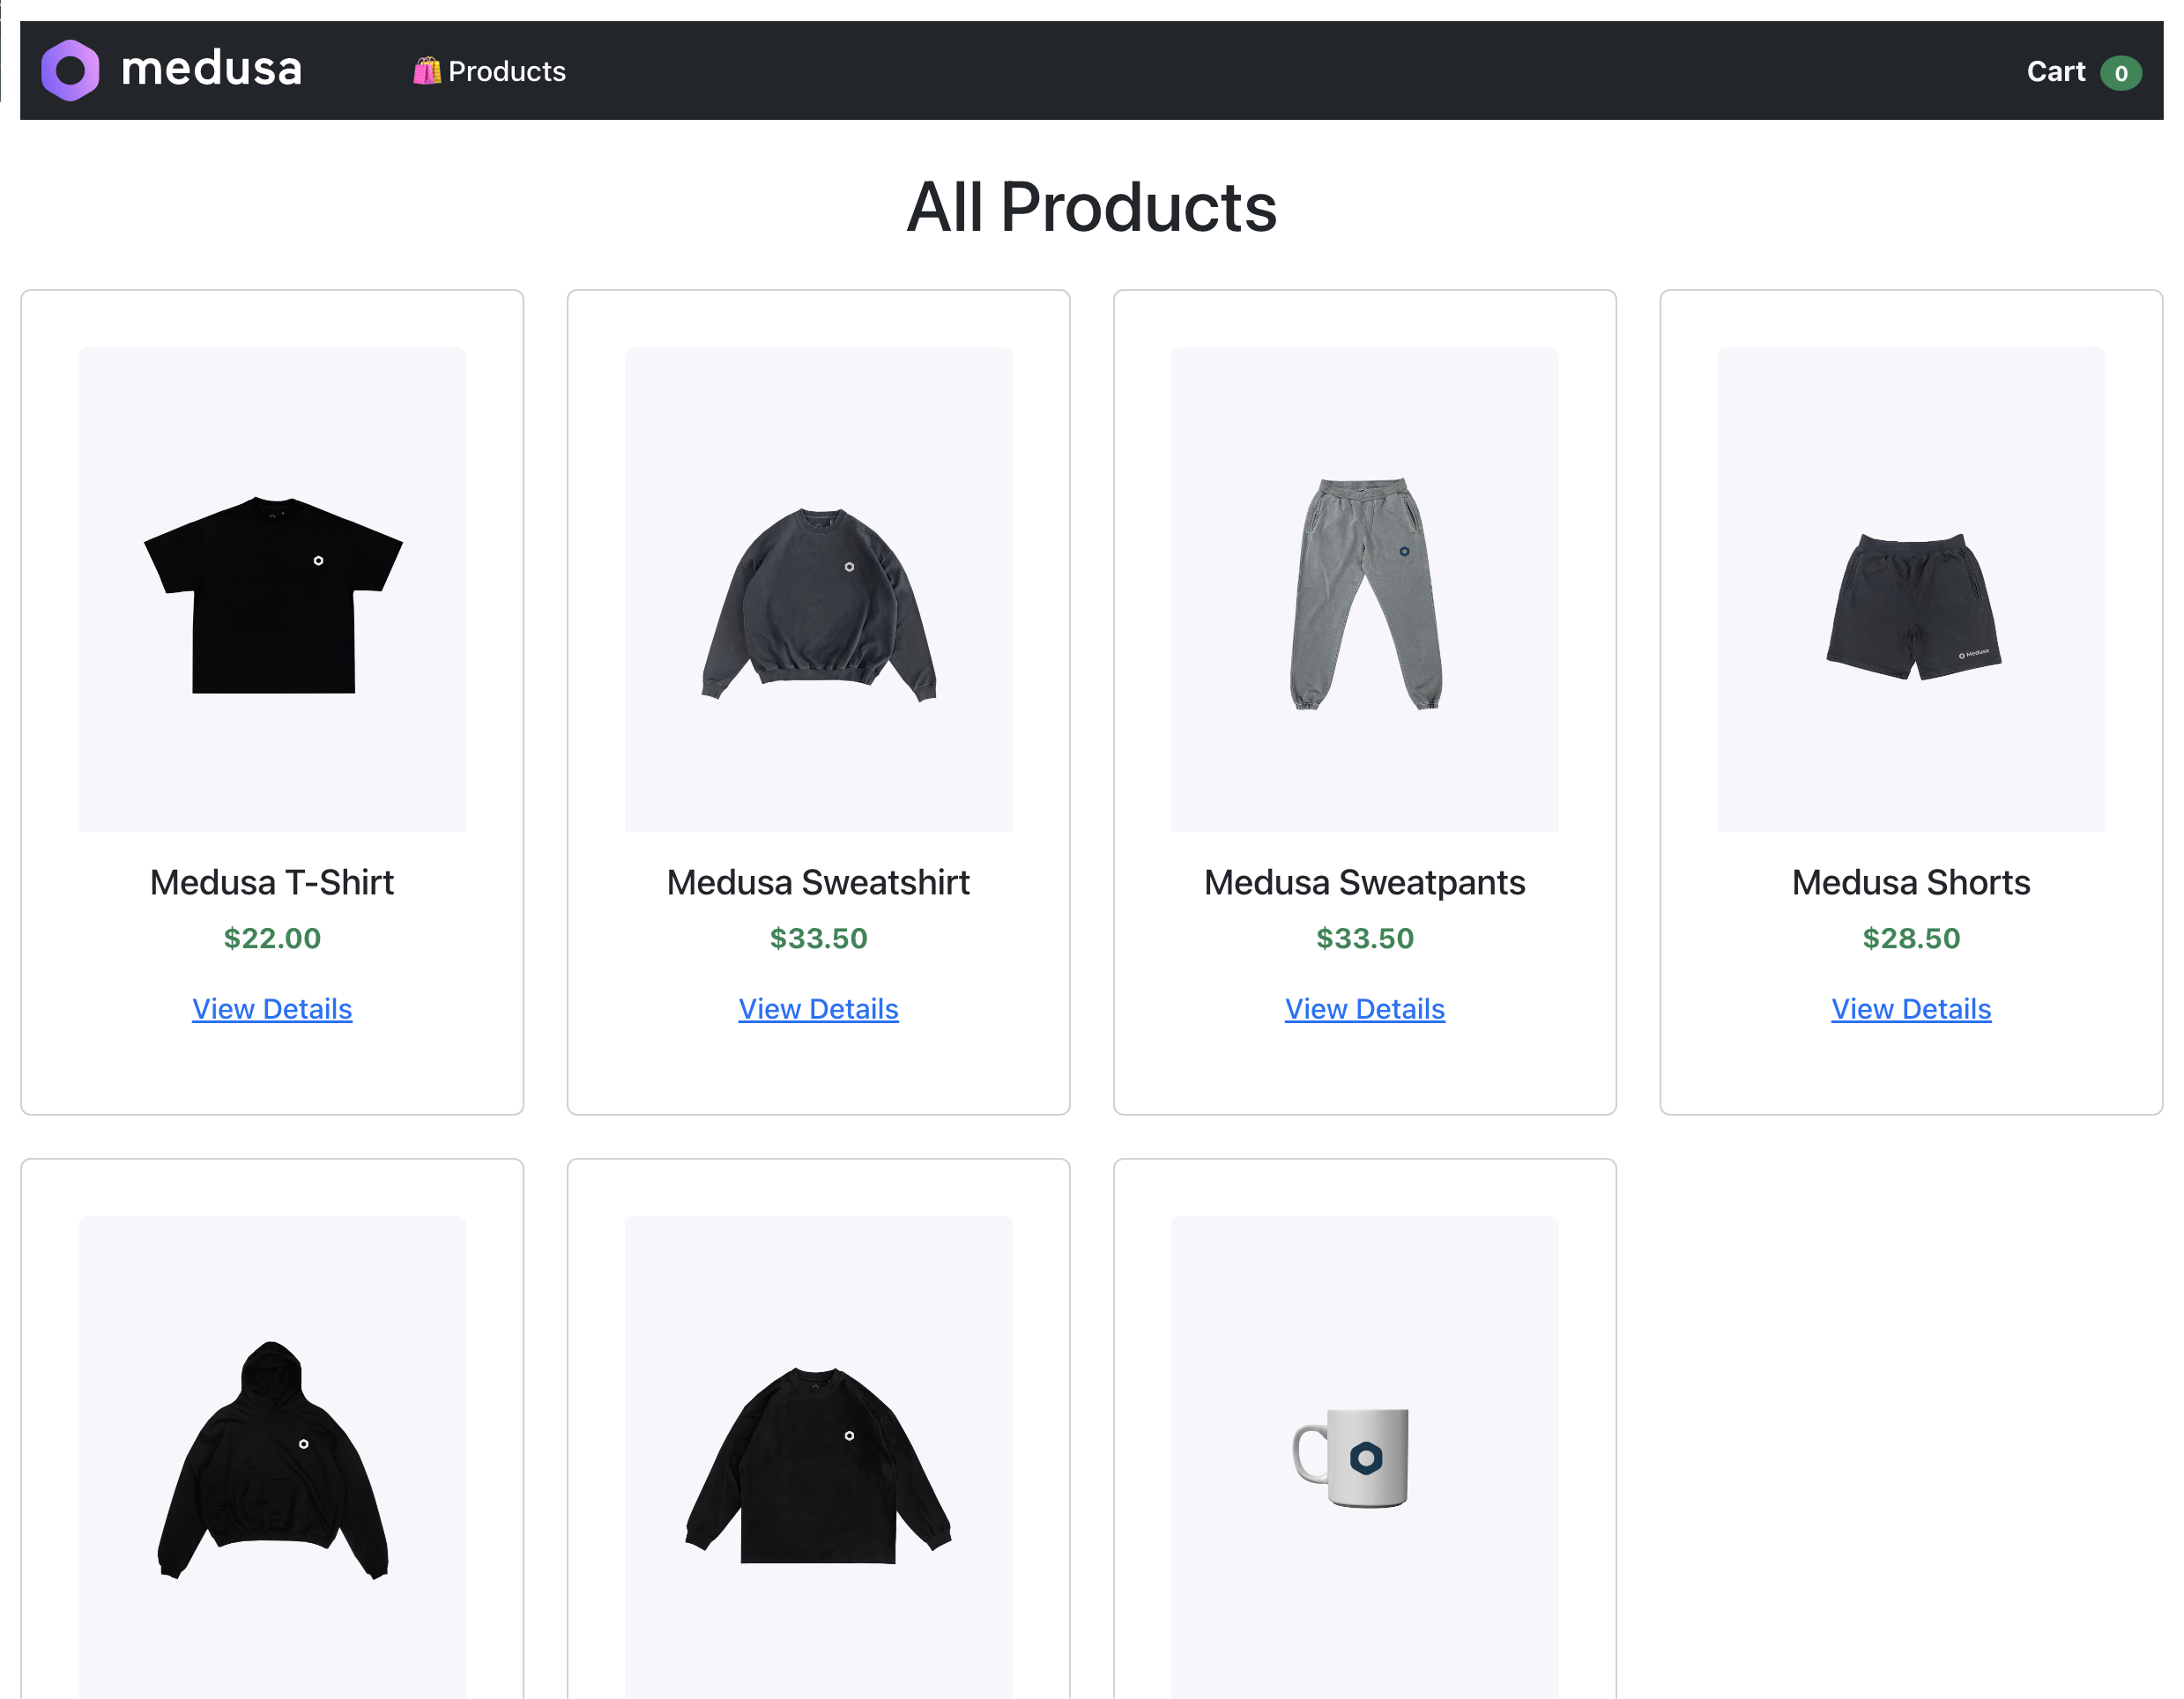 List of all products on the home page